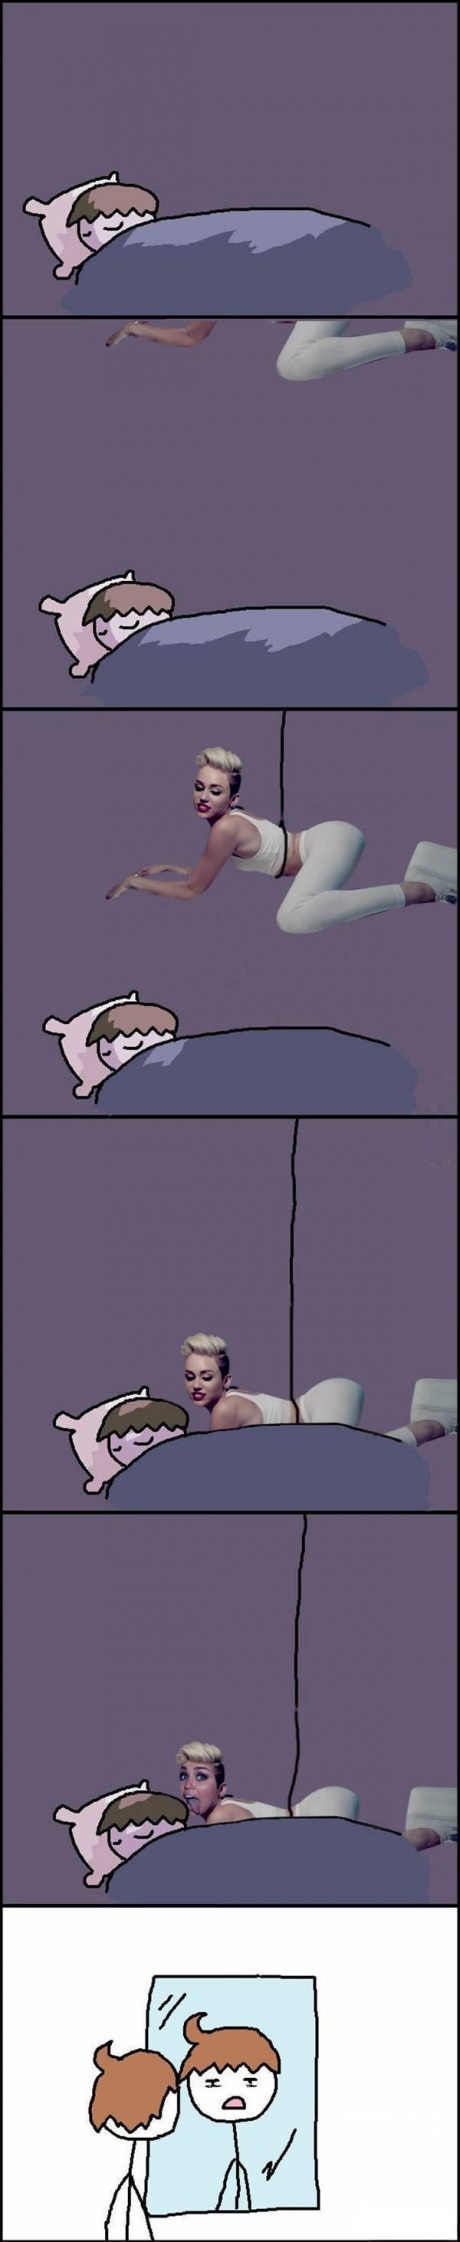 funny-pciture-every-night-miley-cyrus-comics